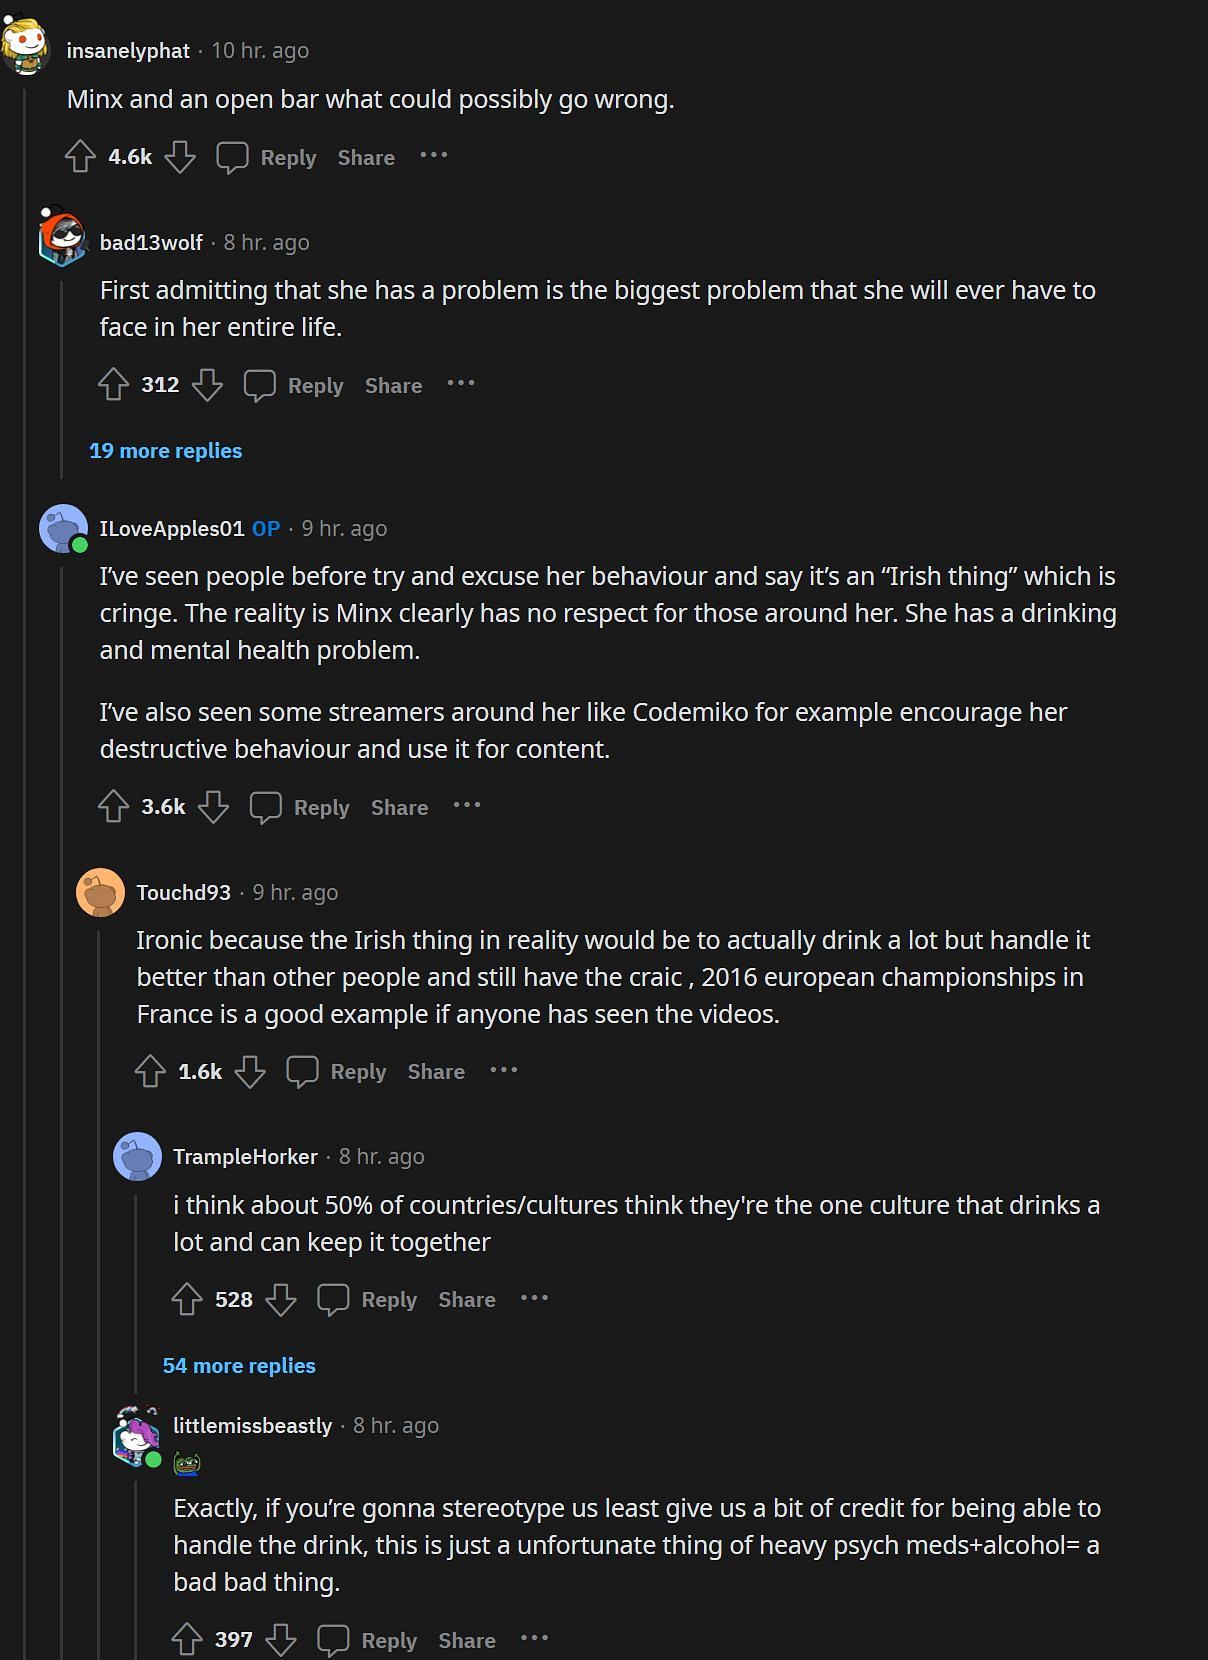 Reddit comments about JustaMinx (Image via r/LivestreamFail)